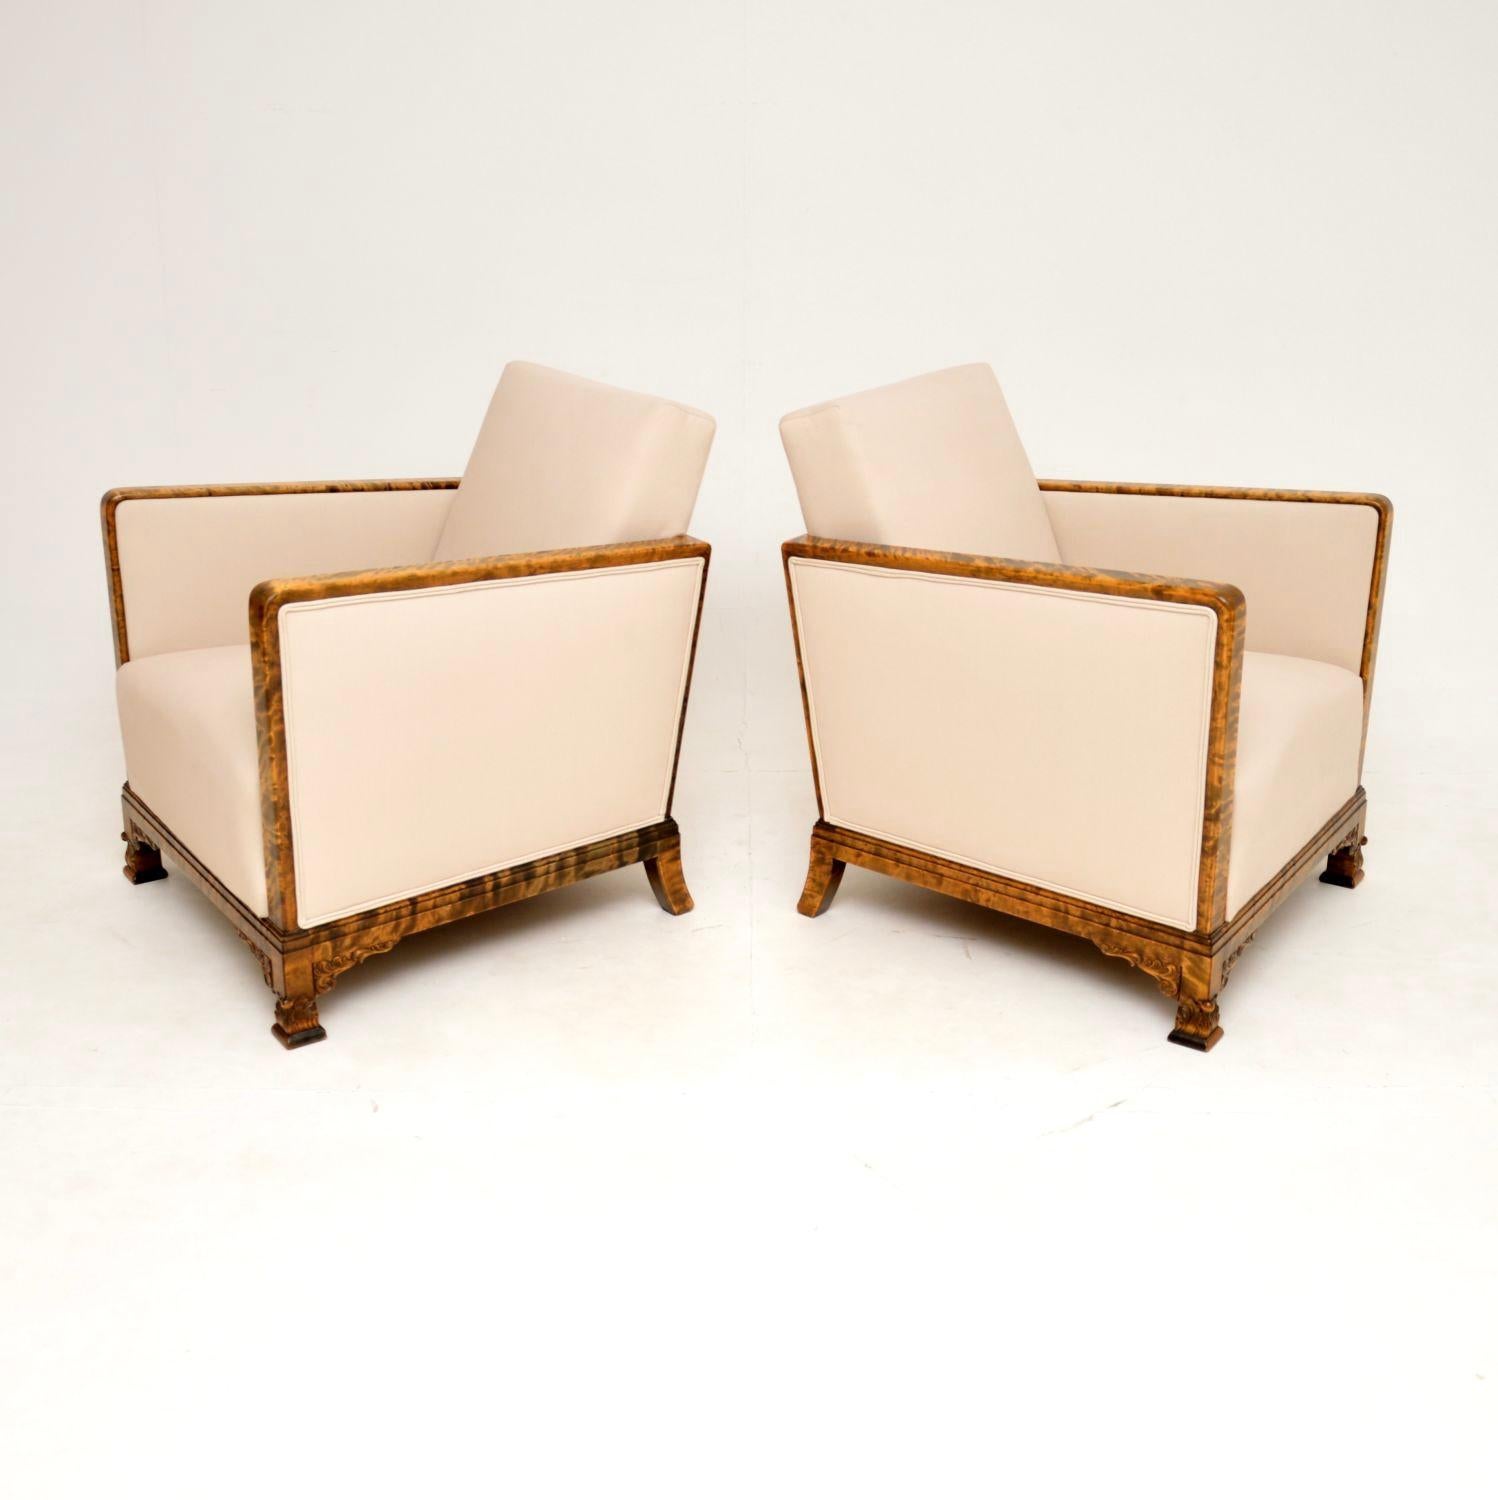 Pair of Art Deco Swedish Satin Birch Armchairs In Good Condition For Sale In London, GB